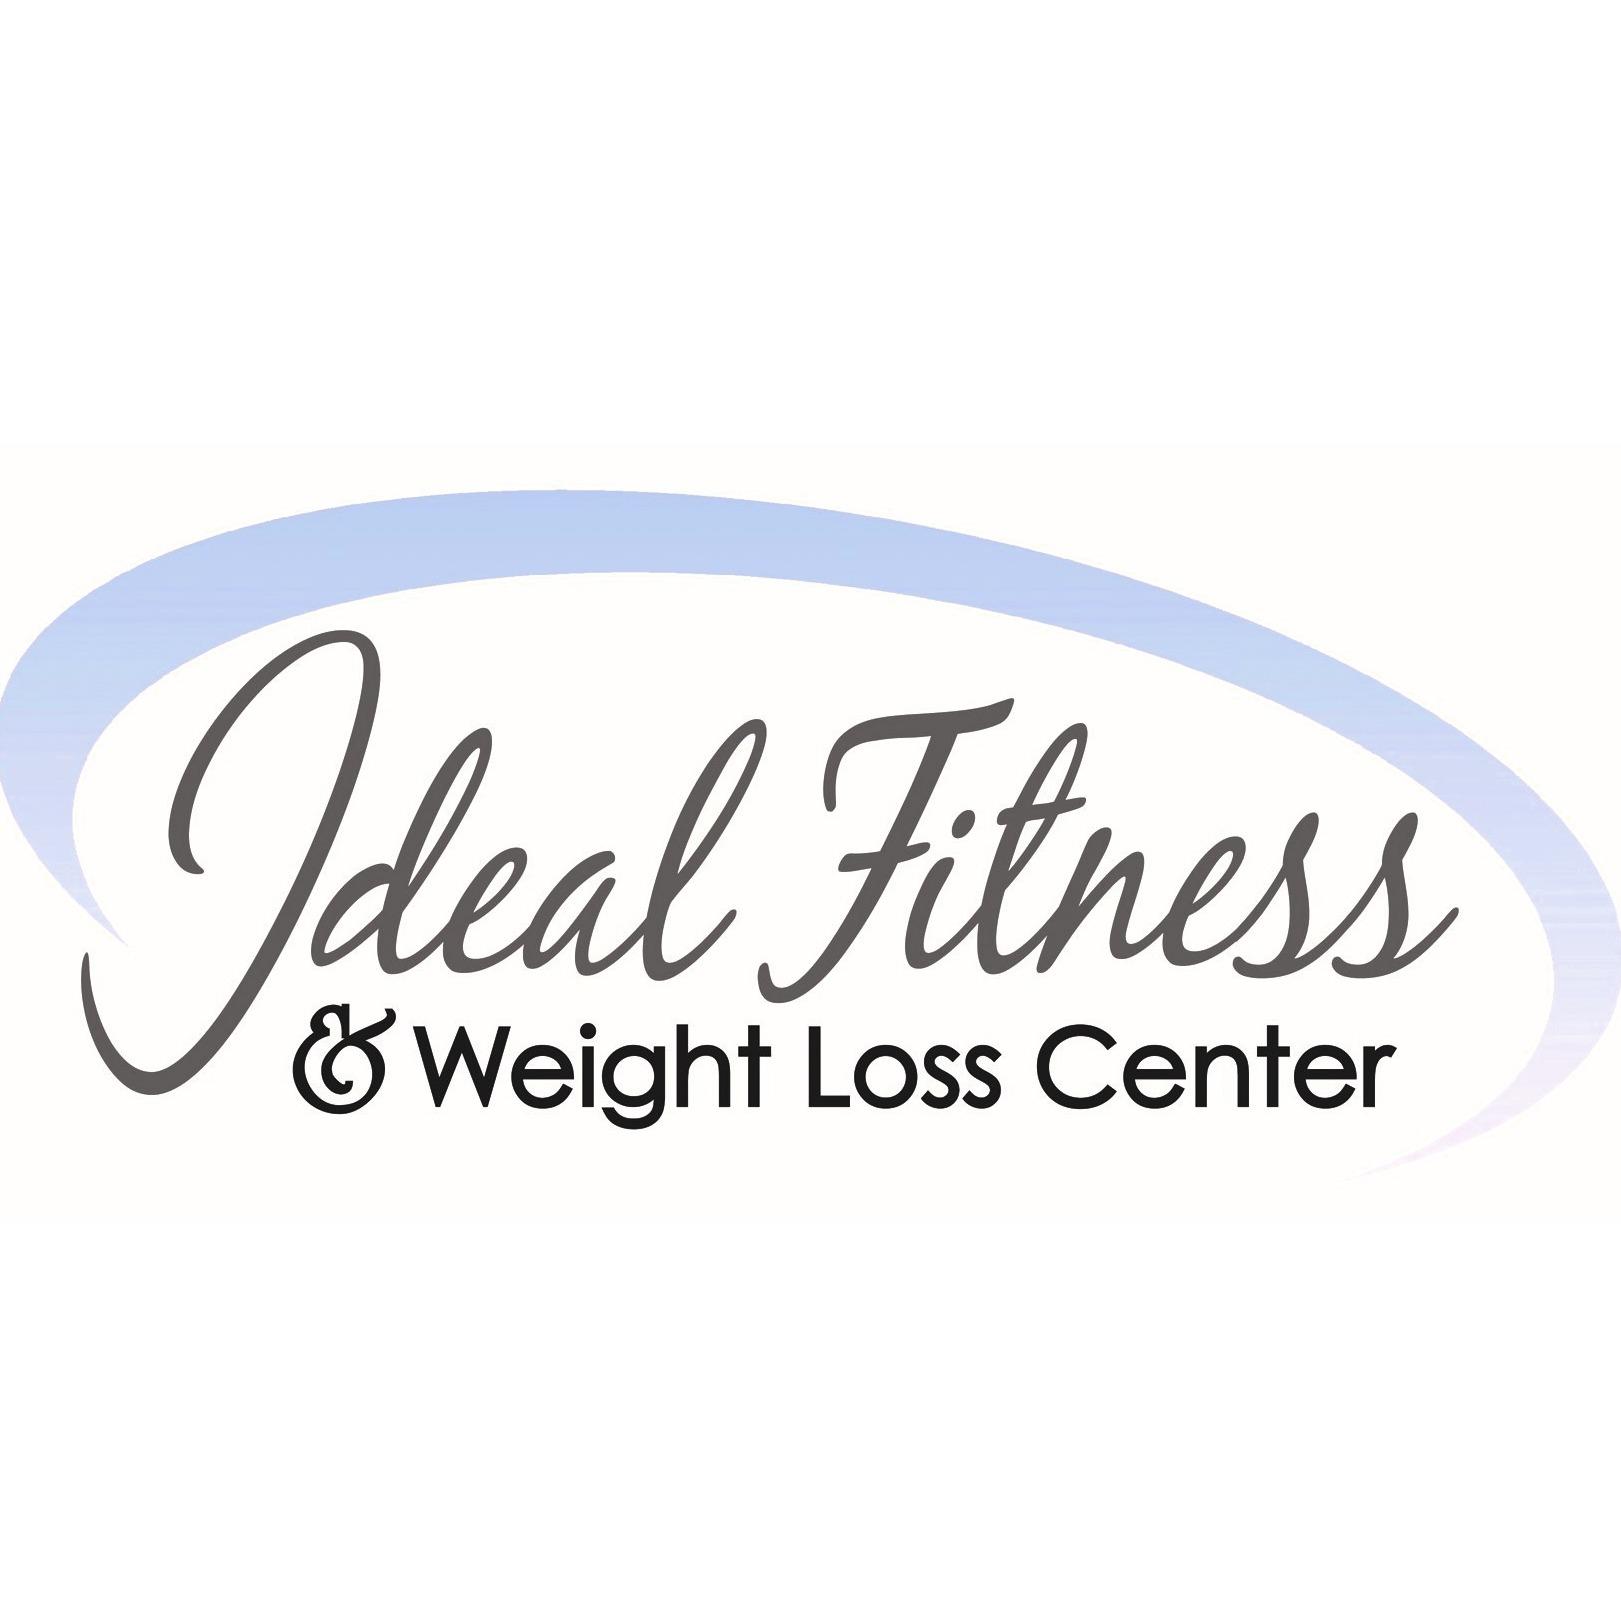 Ideal Fitness & Weight Loss Center LLC Coupons near me in ...